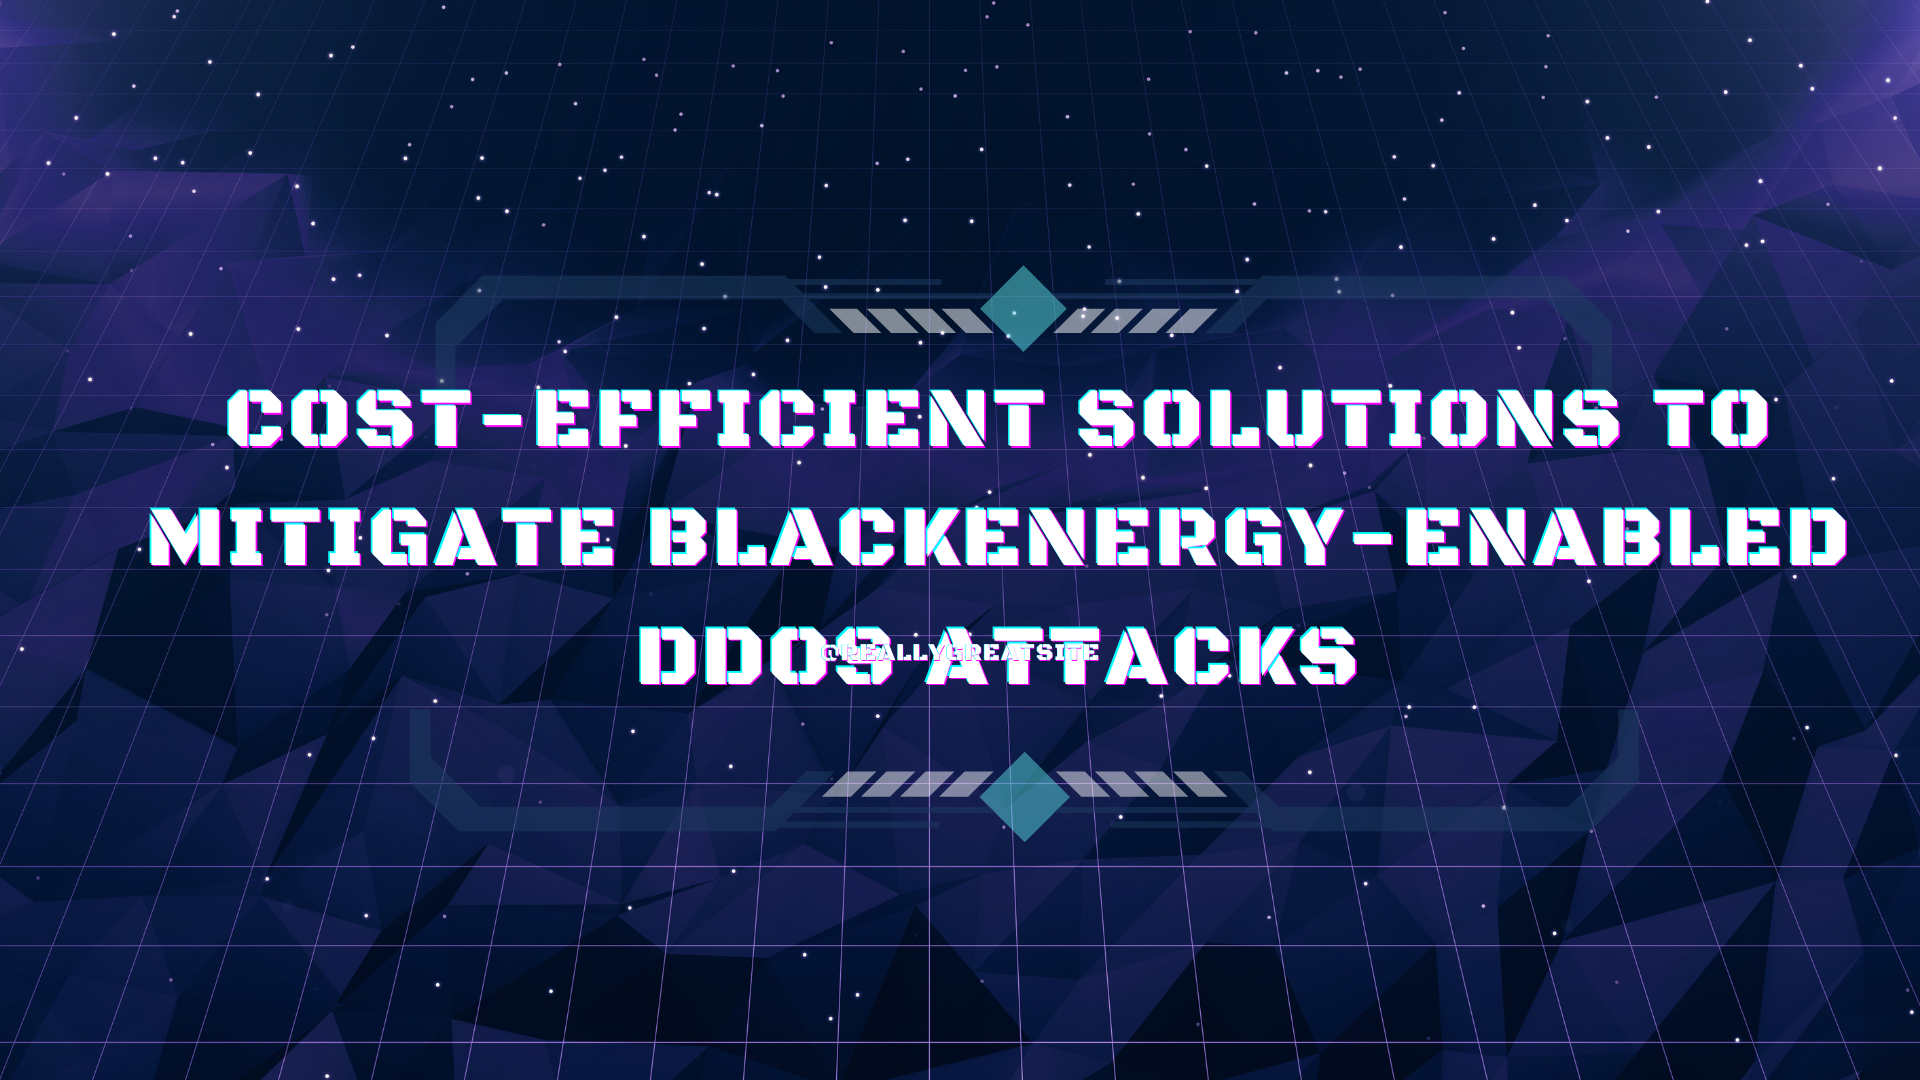 Cost-Efficient Solutions to Mitigate BlackEnergy-Enabled DDoS Attacks